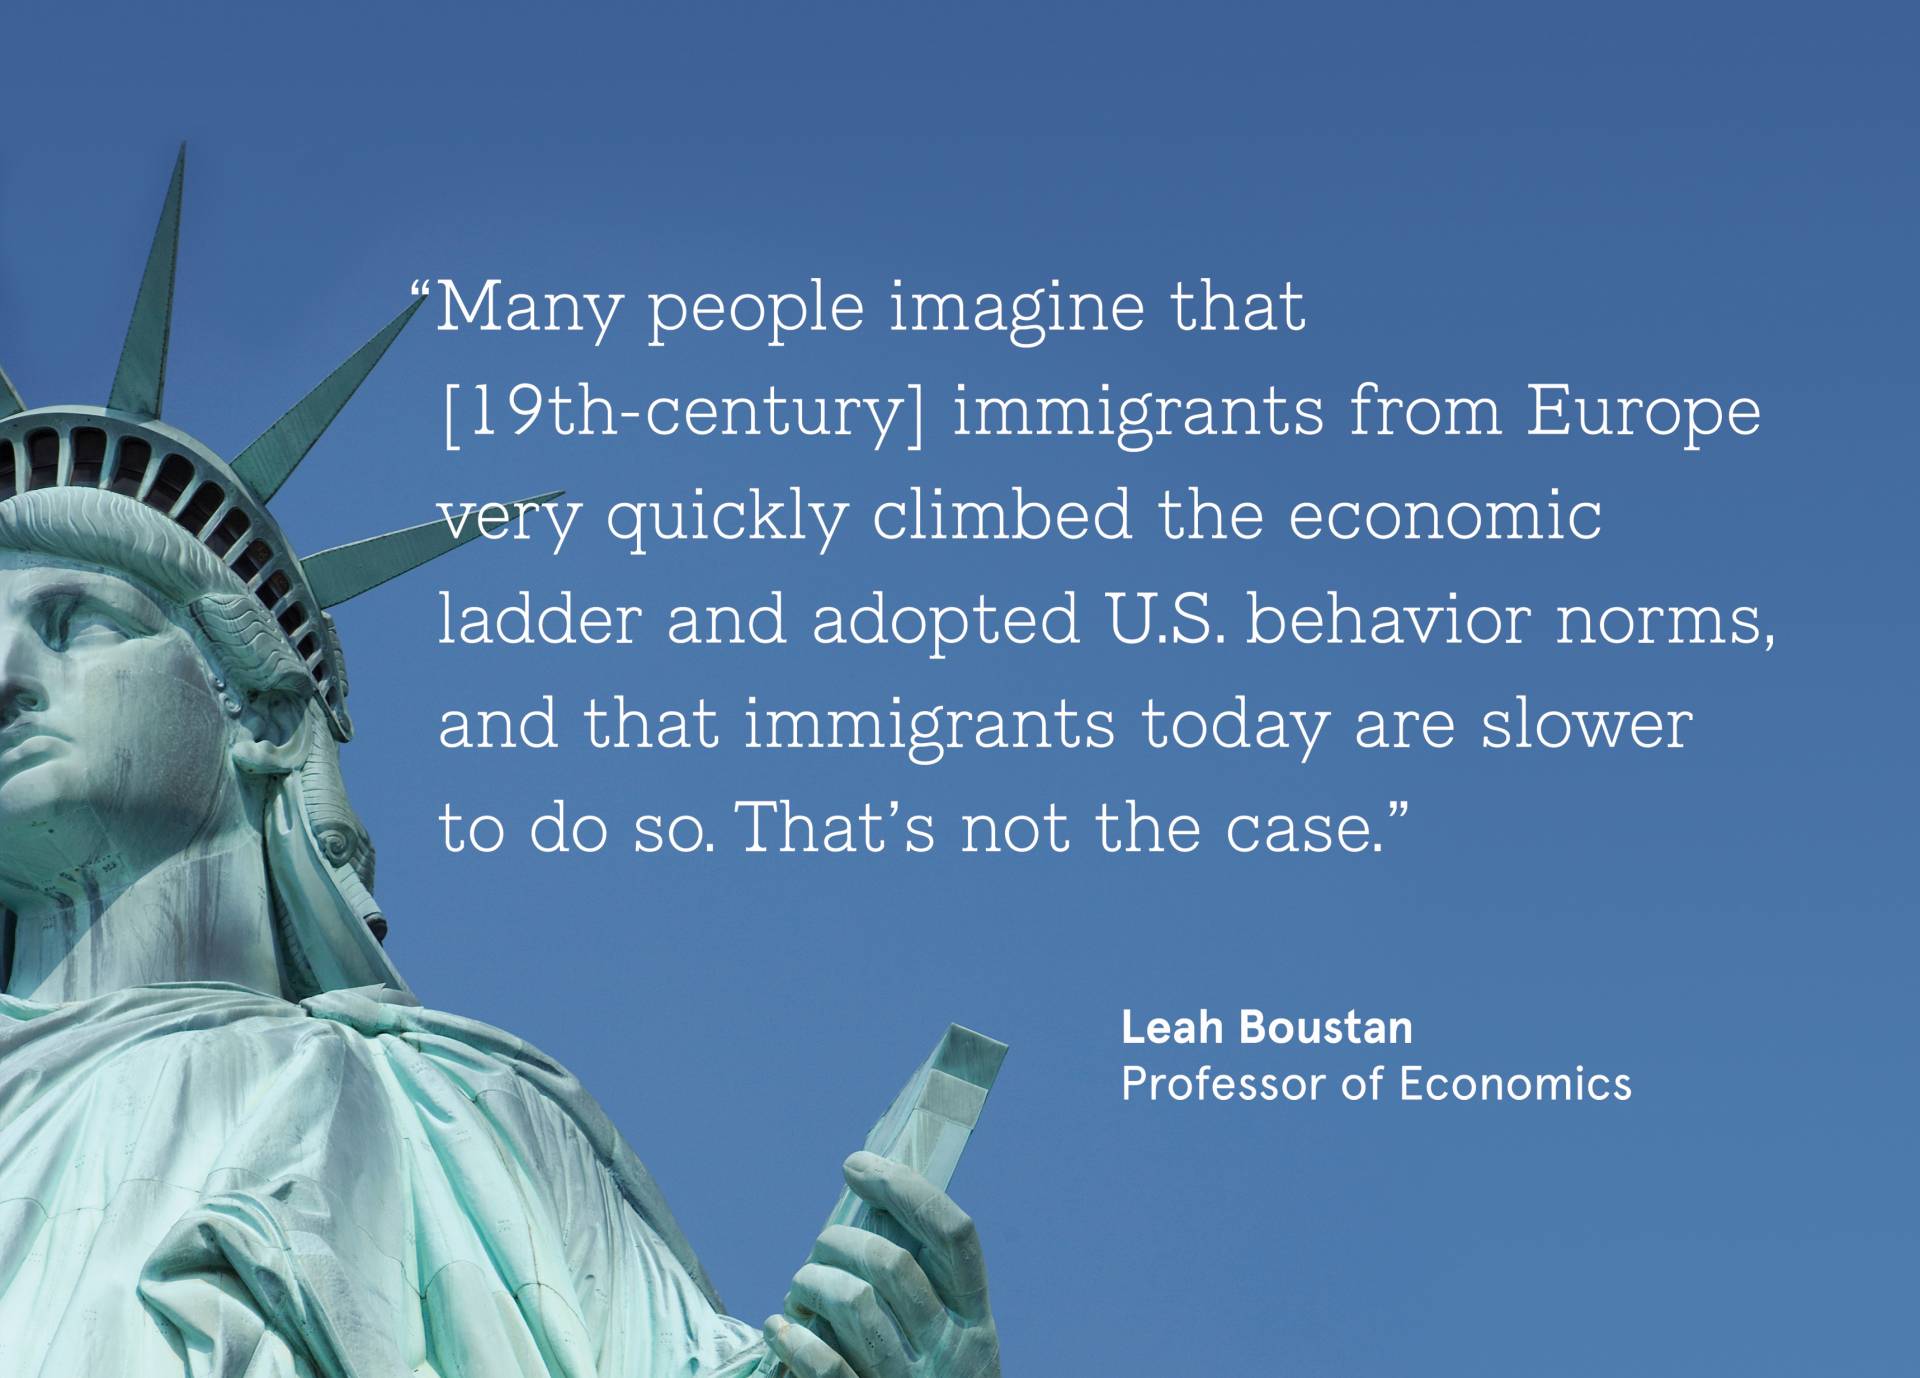 Statue of Liberty with quote from Leah Boustan, Professor of Economics; “Many people imagine that  [19th-century] immigrants from Europe very quickly climbed the economic  ladder and adopted U.S. behavior norms, and that immigrants today are slower  to do so. That’s not the case.”